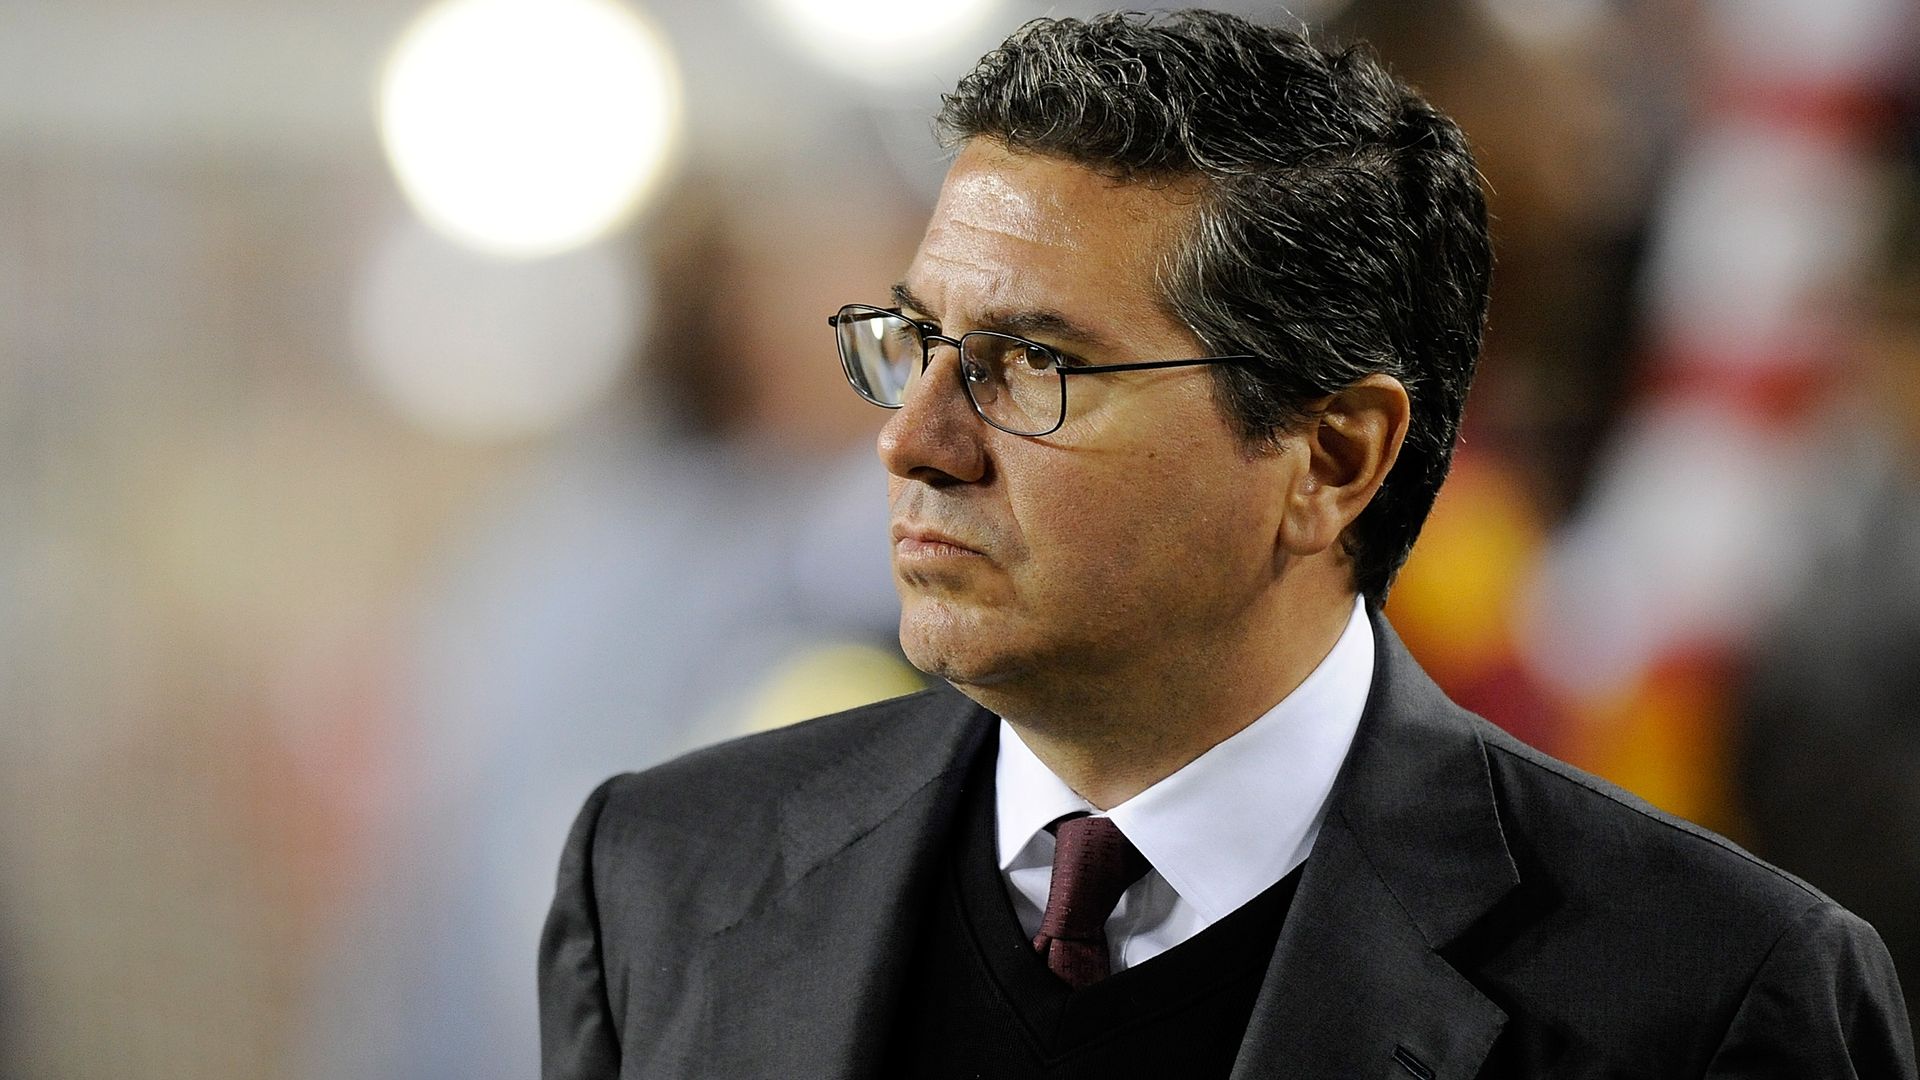 Washington Redskins owner Daniel Snyder looks on before a game between the New York Giants and Washington Redskins.